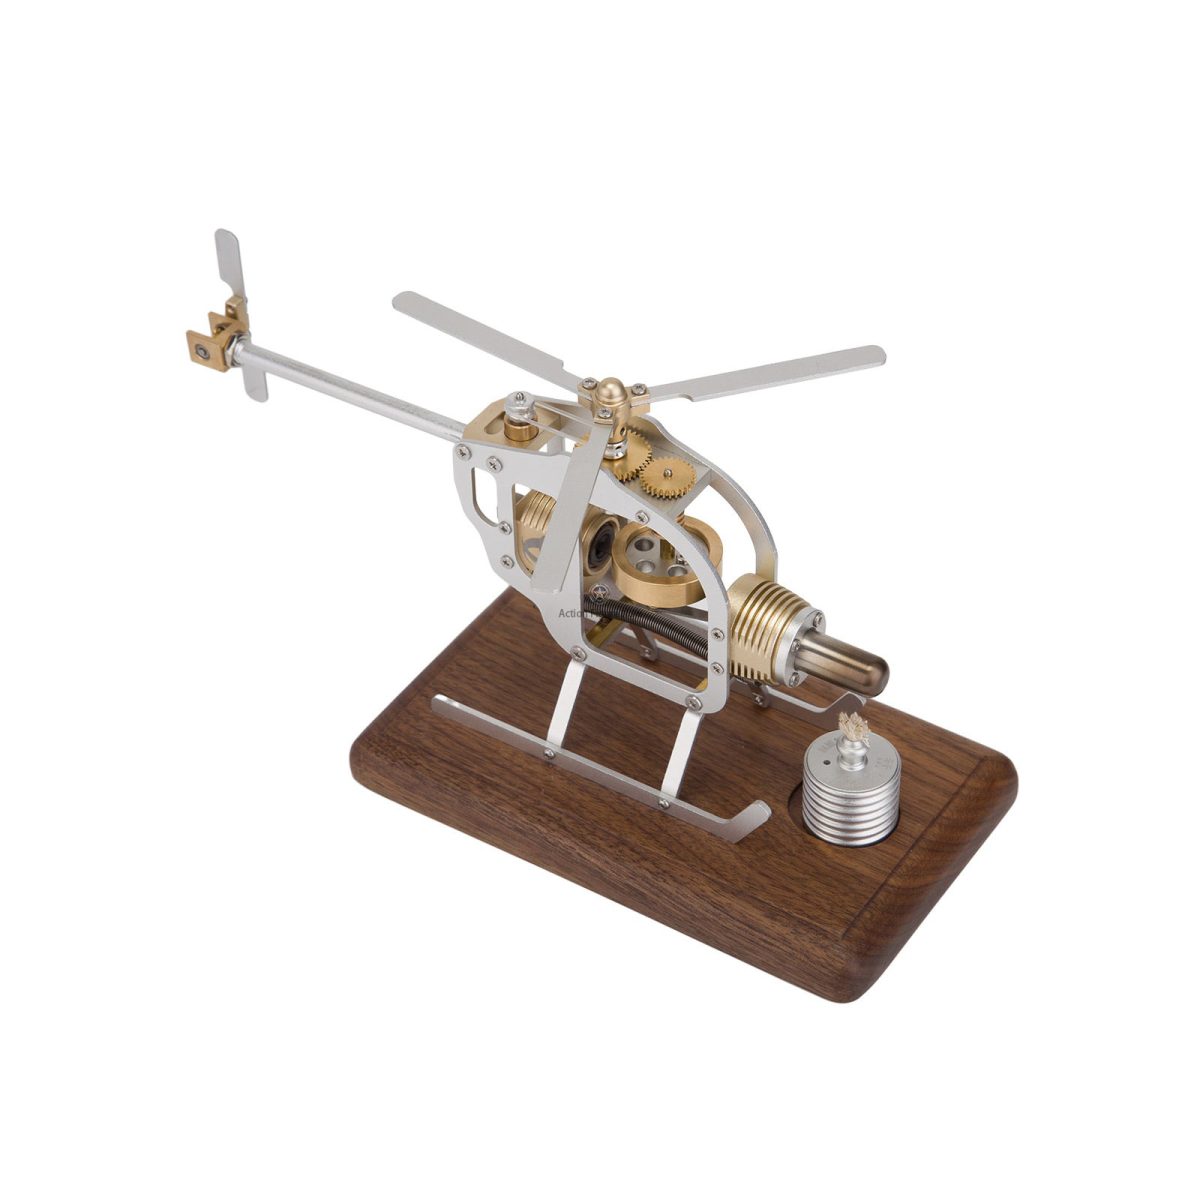 DIY Stirling Engine Helicopter Kit - Working Stirling Cycle Model